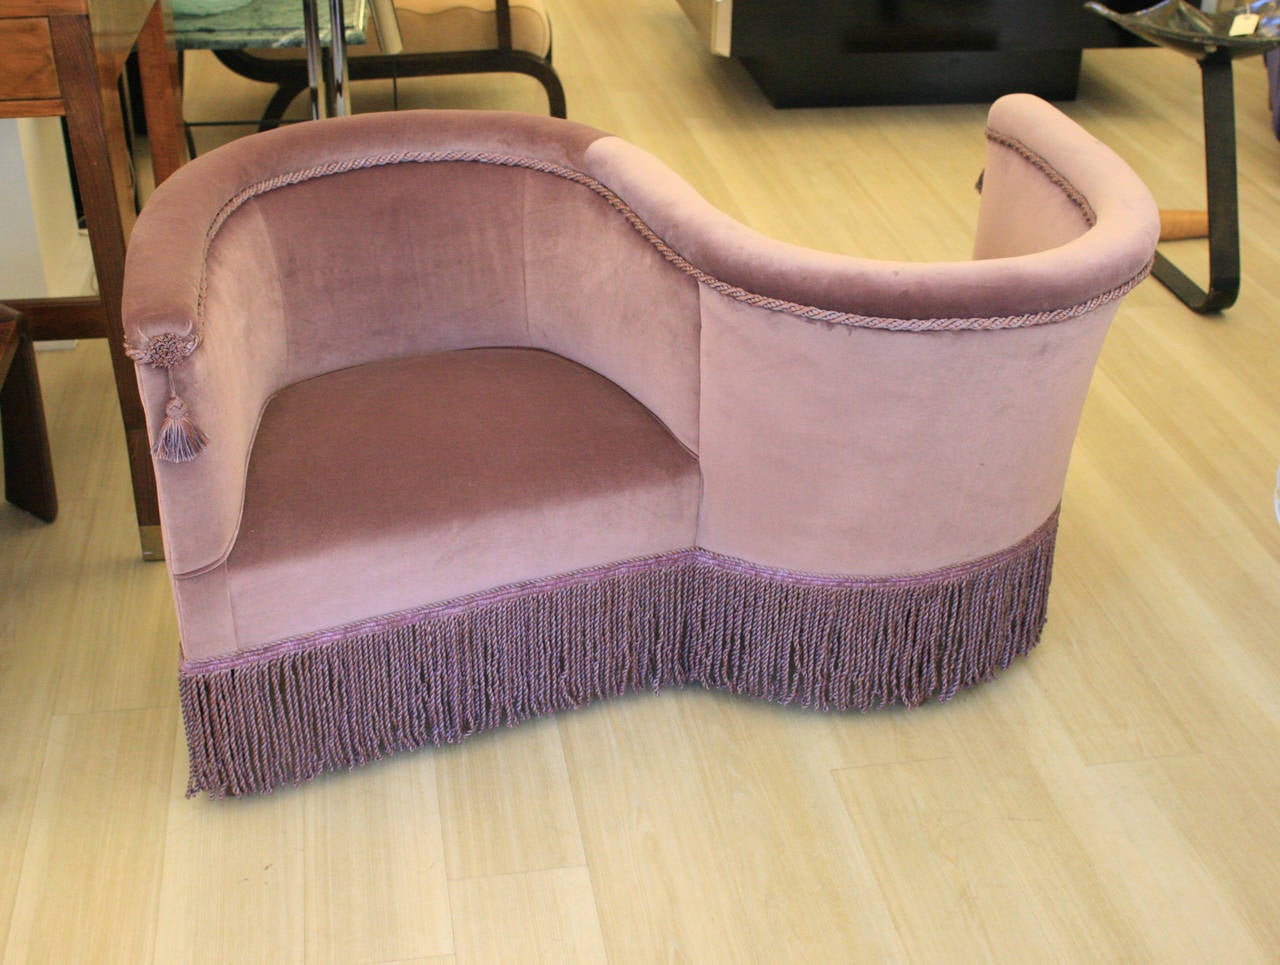 A two-seat loveseat 1940s Italian design attributed to Vincenzo Menegatti upholstered in pastel lilac velvet. Very rare piece.